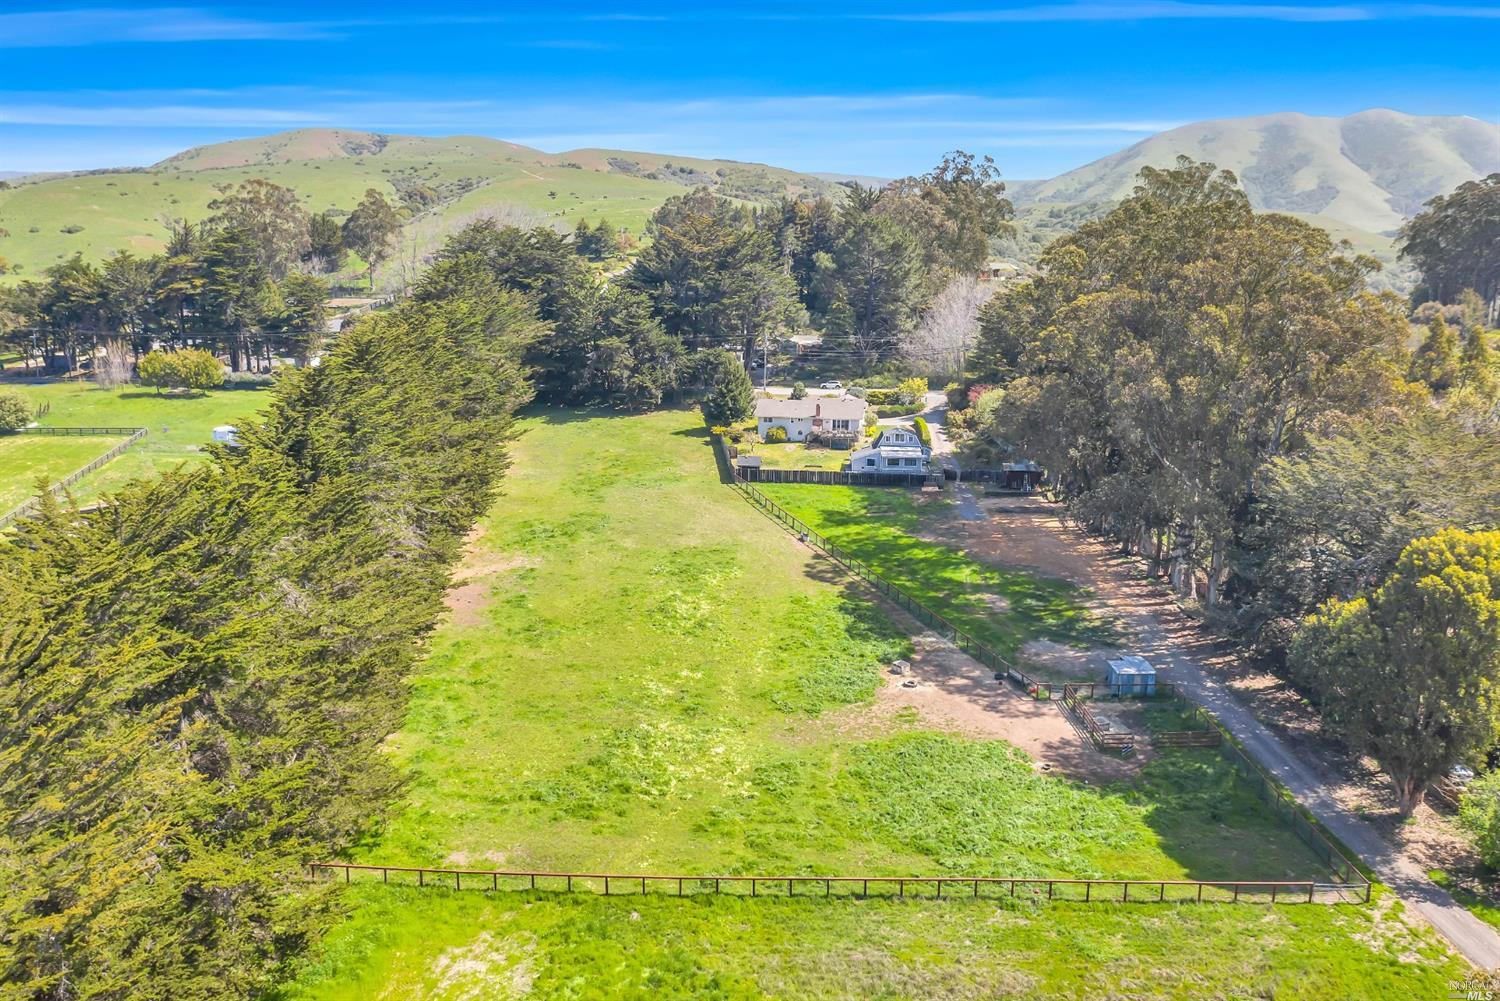 Overview of property from Viento Way to Highway One